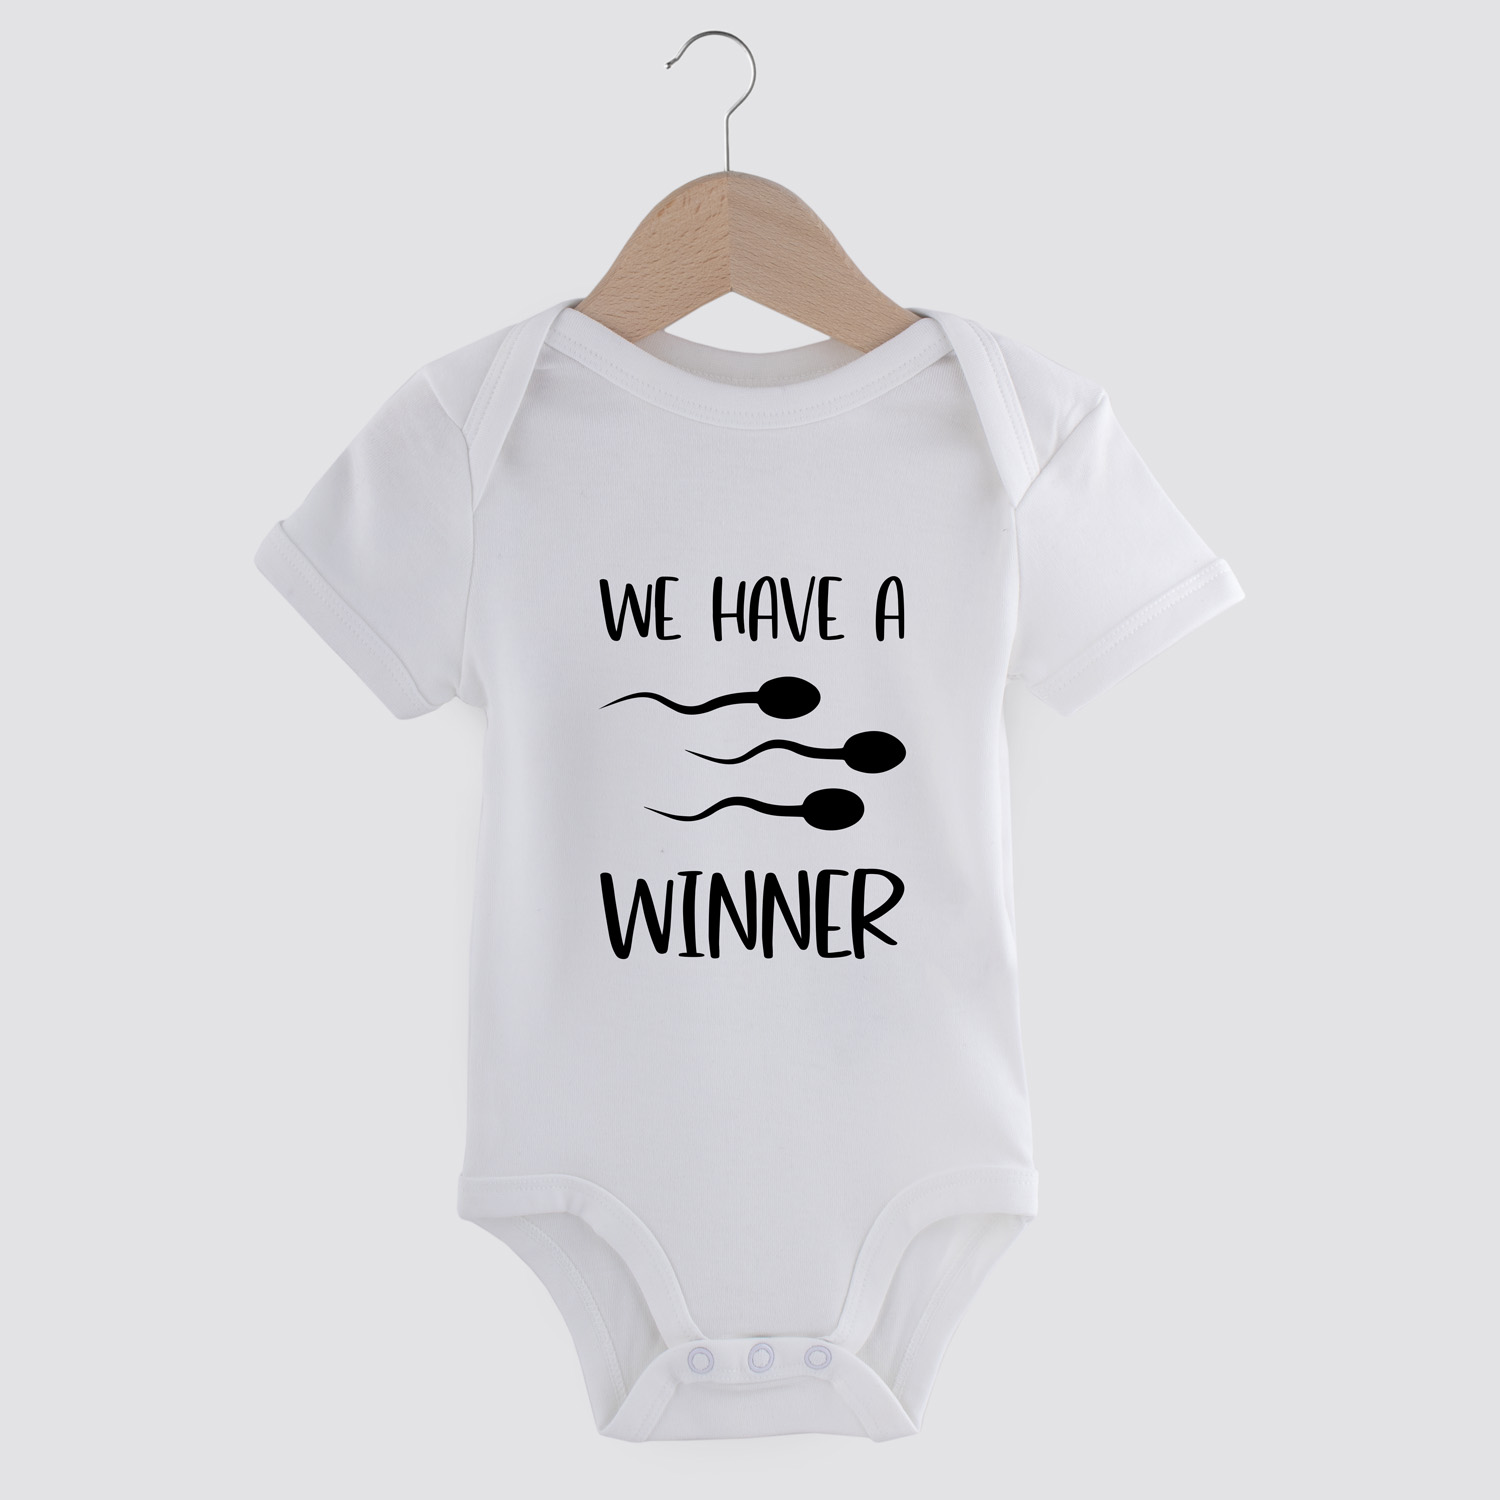 We have a winner | Baby romper | my fabulous life.